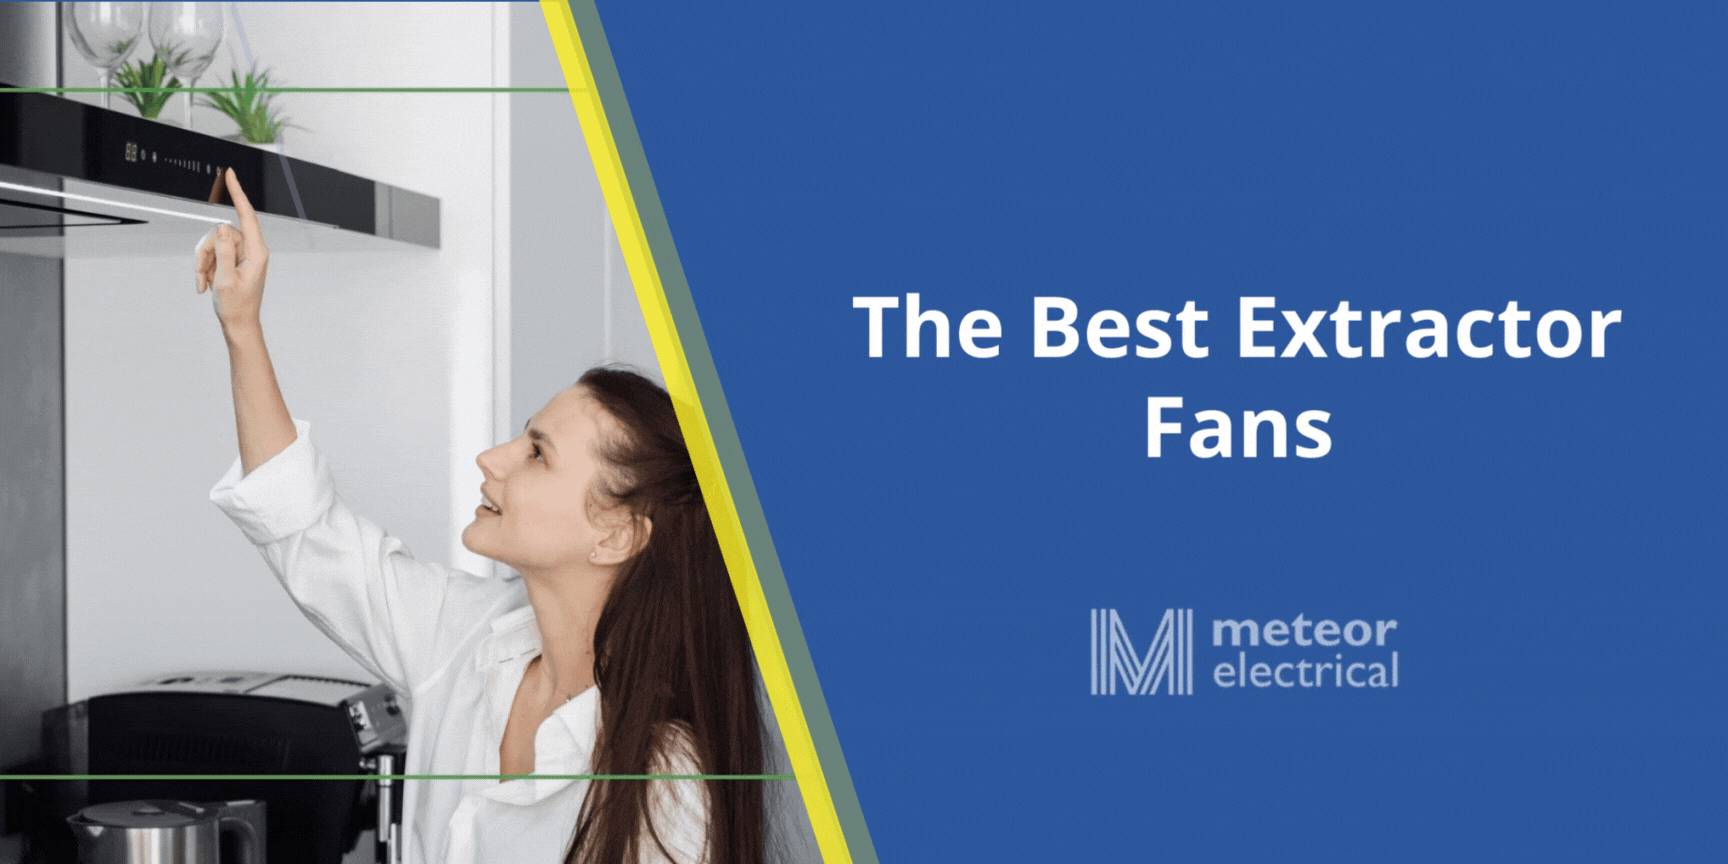 The Best Extractor Fans